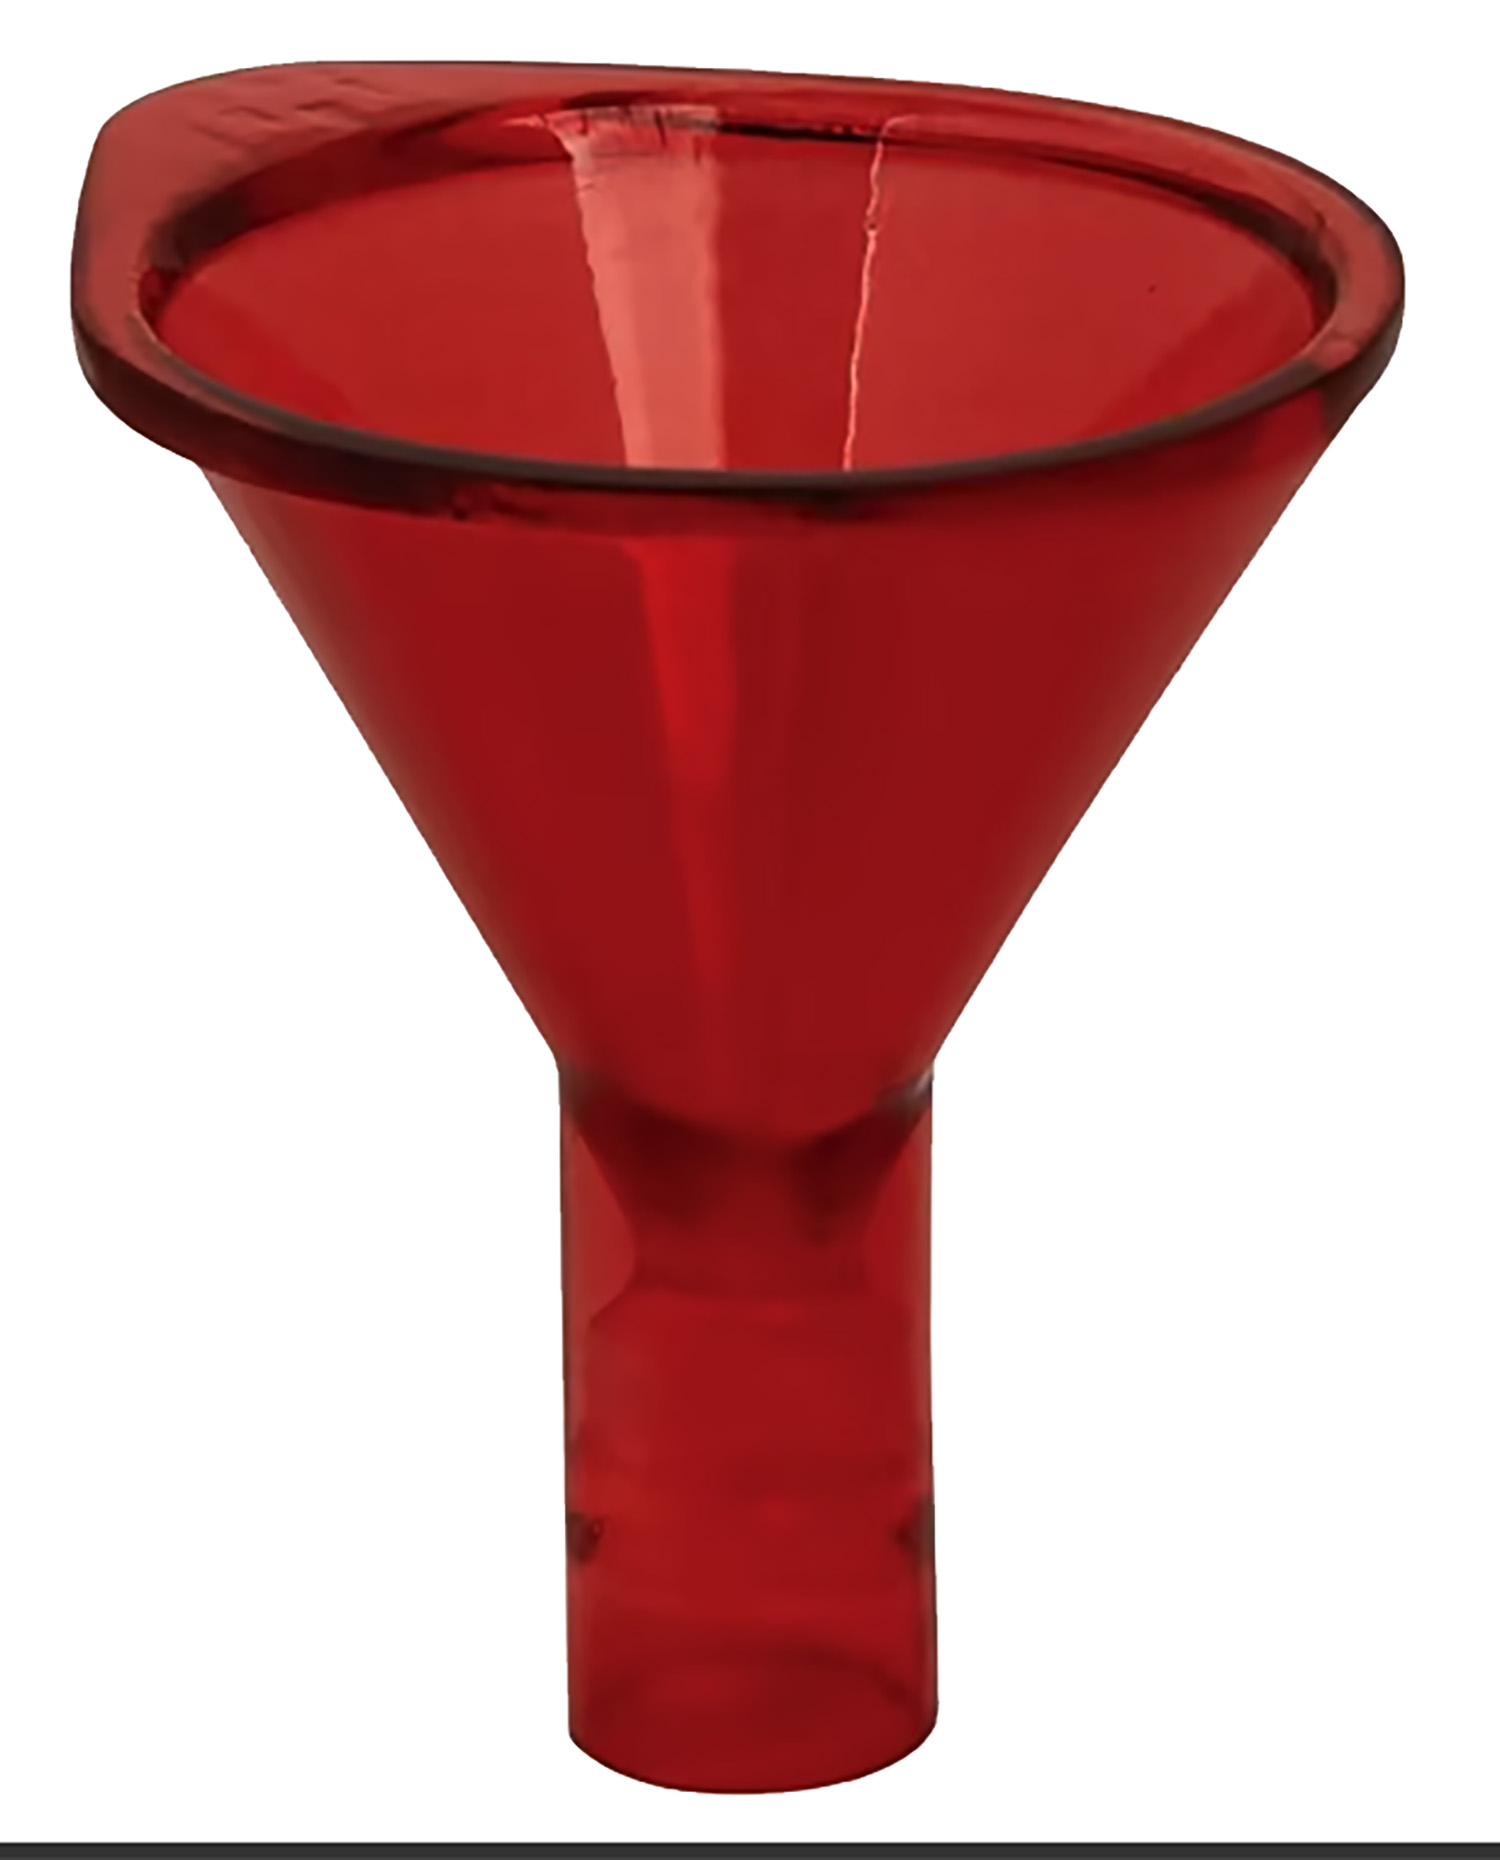 Hornady 586051 Basic Powder Funnel Red 22 to 45 Caliber Plastic